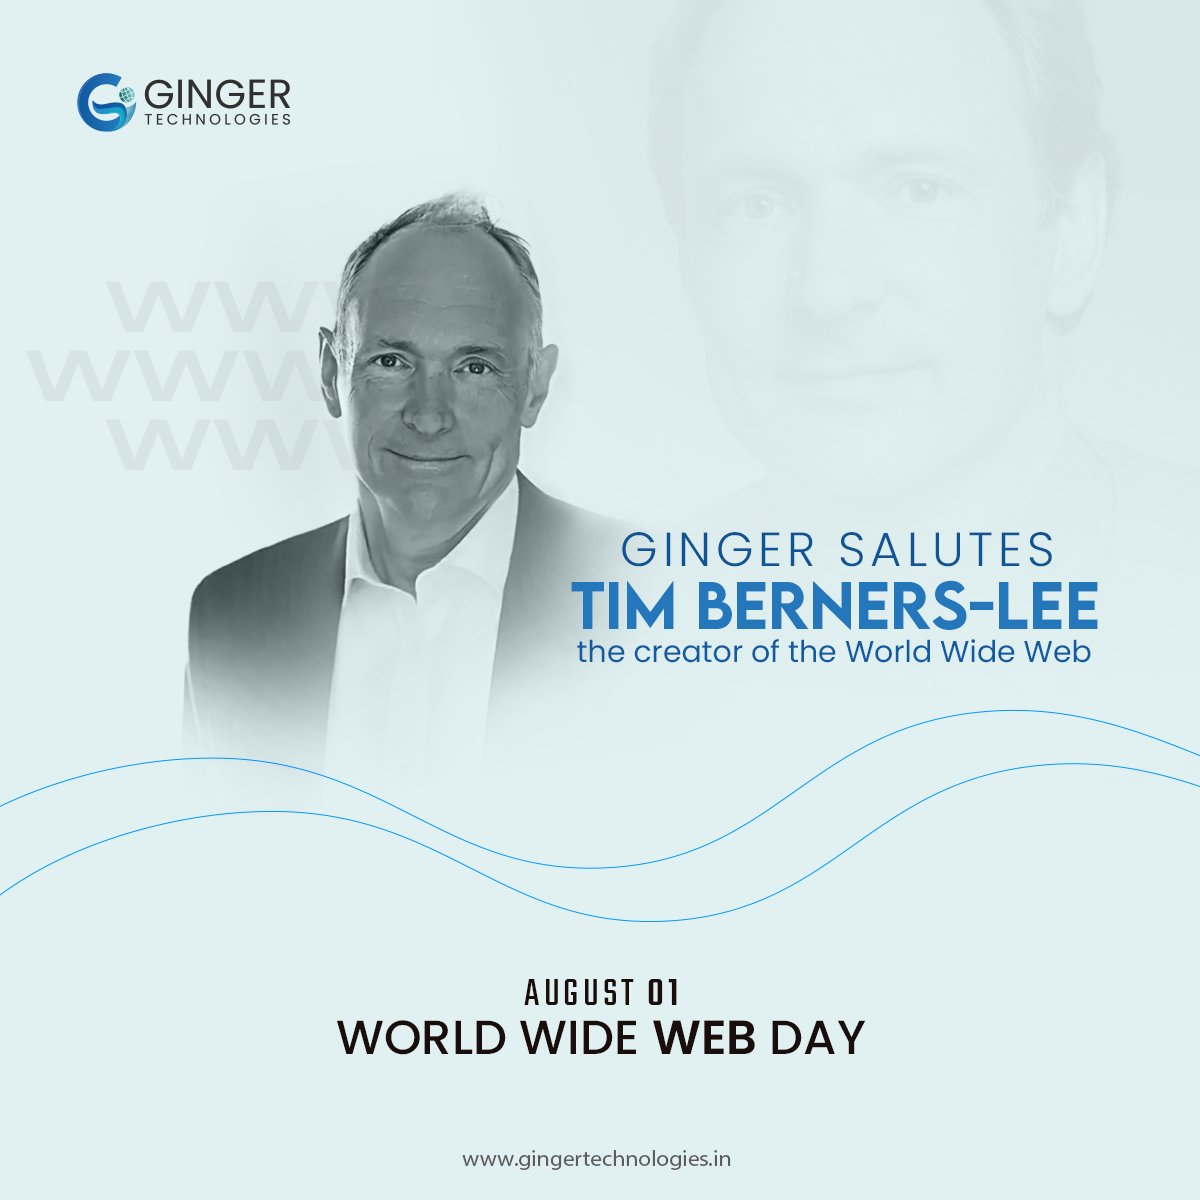 We honor Sir Tim Berners-Lee today for creating the World Wide Web and for his visionary foresight. Let's continue shaping a brighter digital future together.

#WorldWideWebDay #TimBernersLee #DigitalRevolution #InternetInnovation